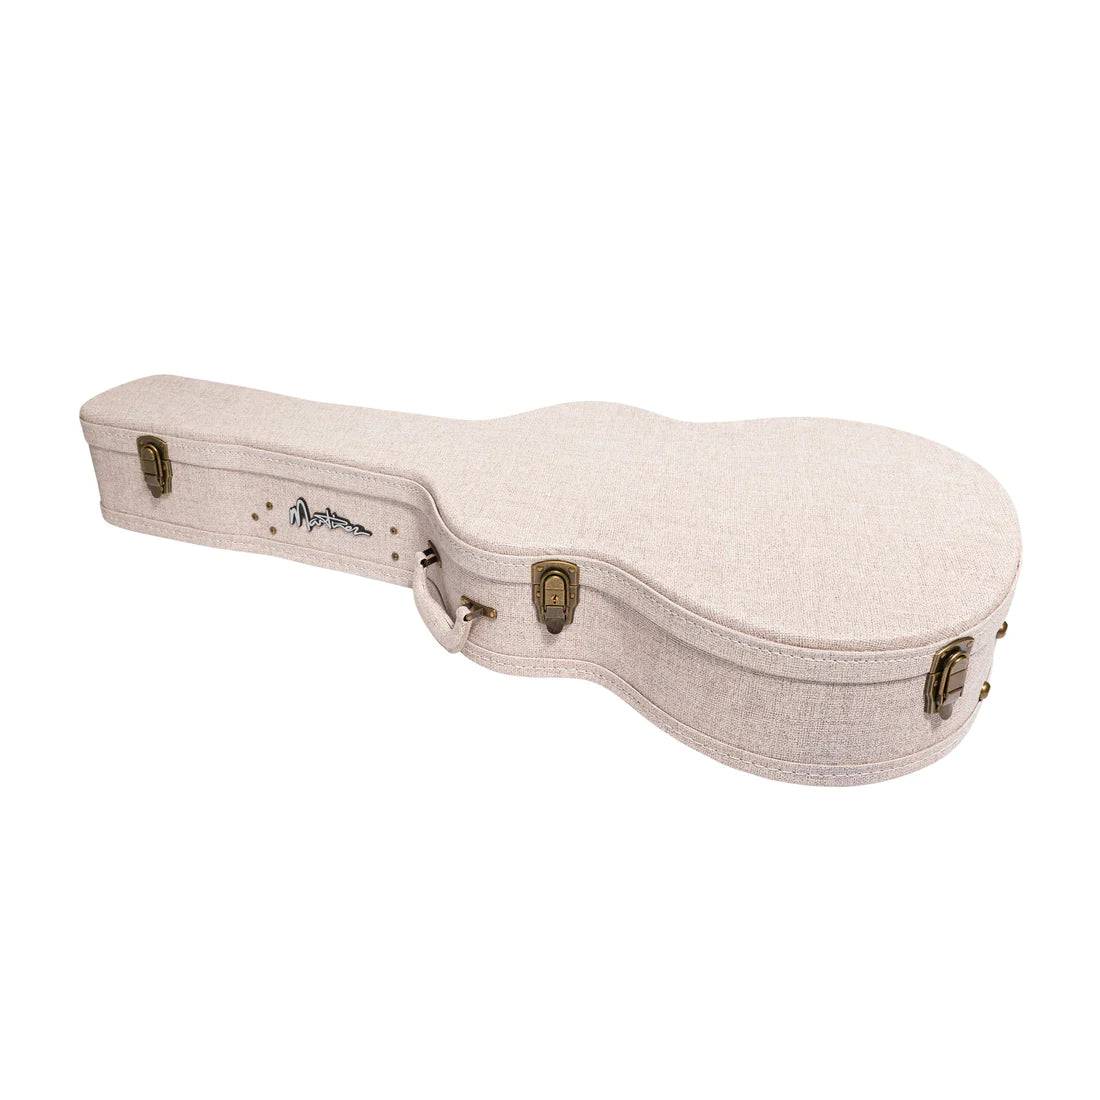 MARTINEZ SMALL BODY DELUXE IVORY HARD CASE - Joondalup Music Centre